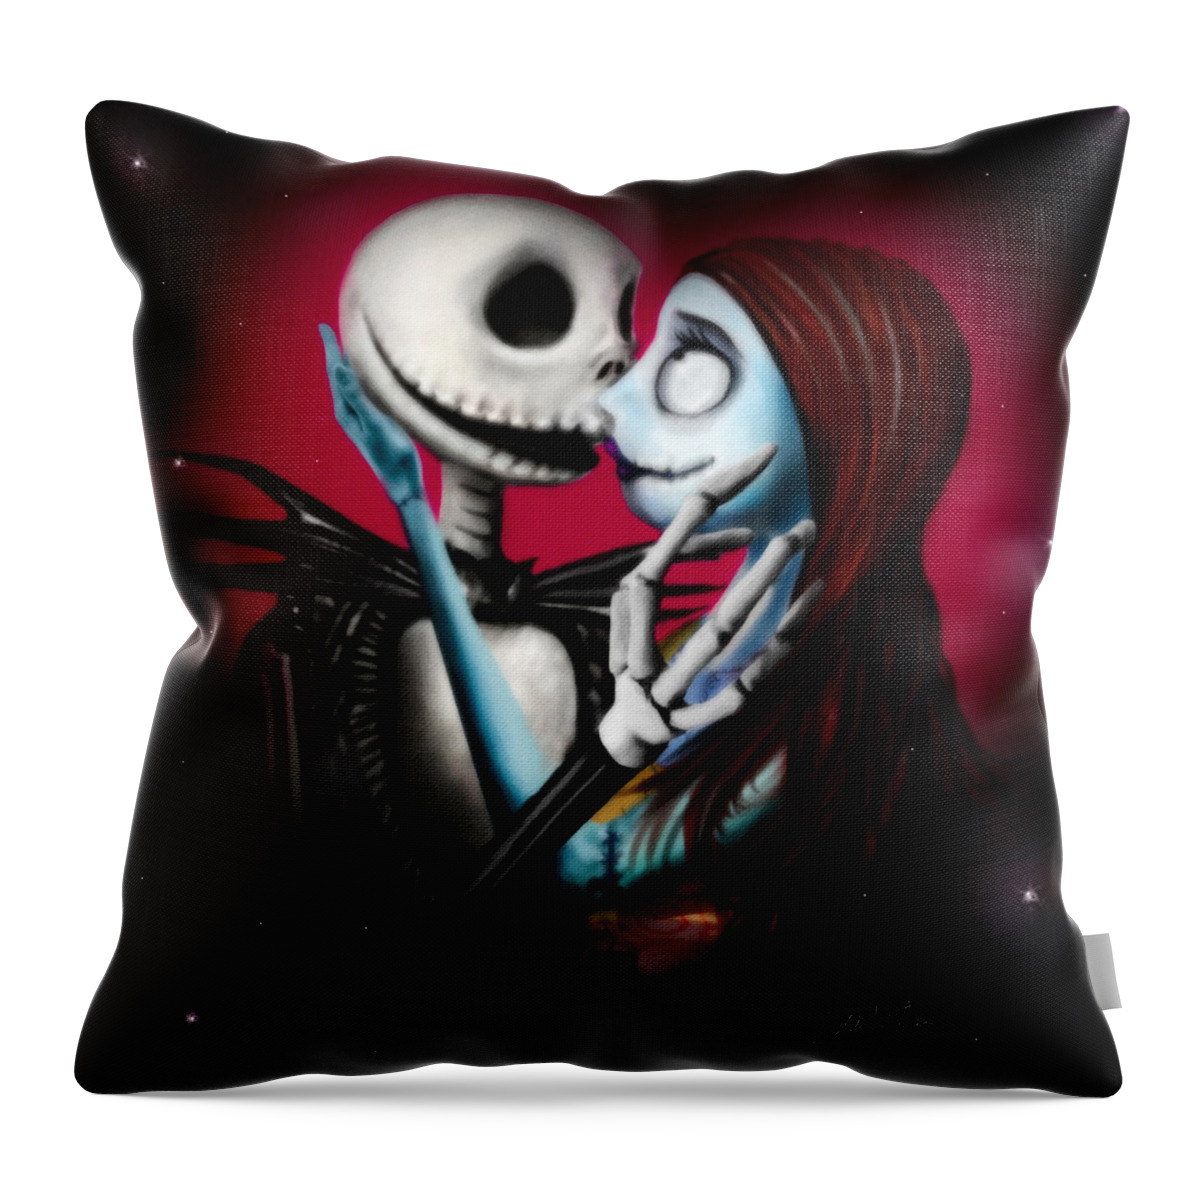 Jack Skeletron Throw Pillow featuring the digital art Two in one heart by Alessandro Della Pietra